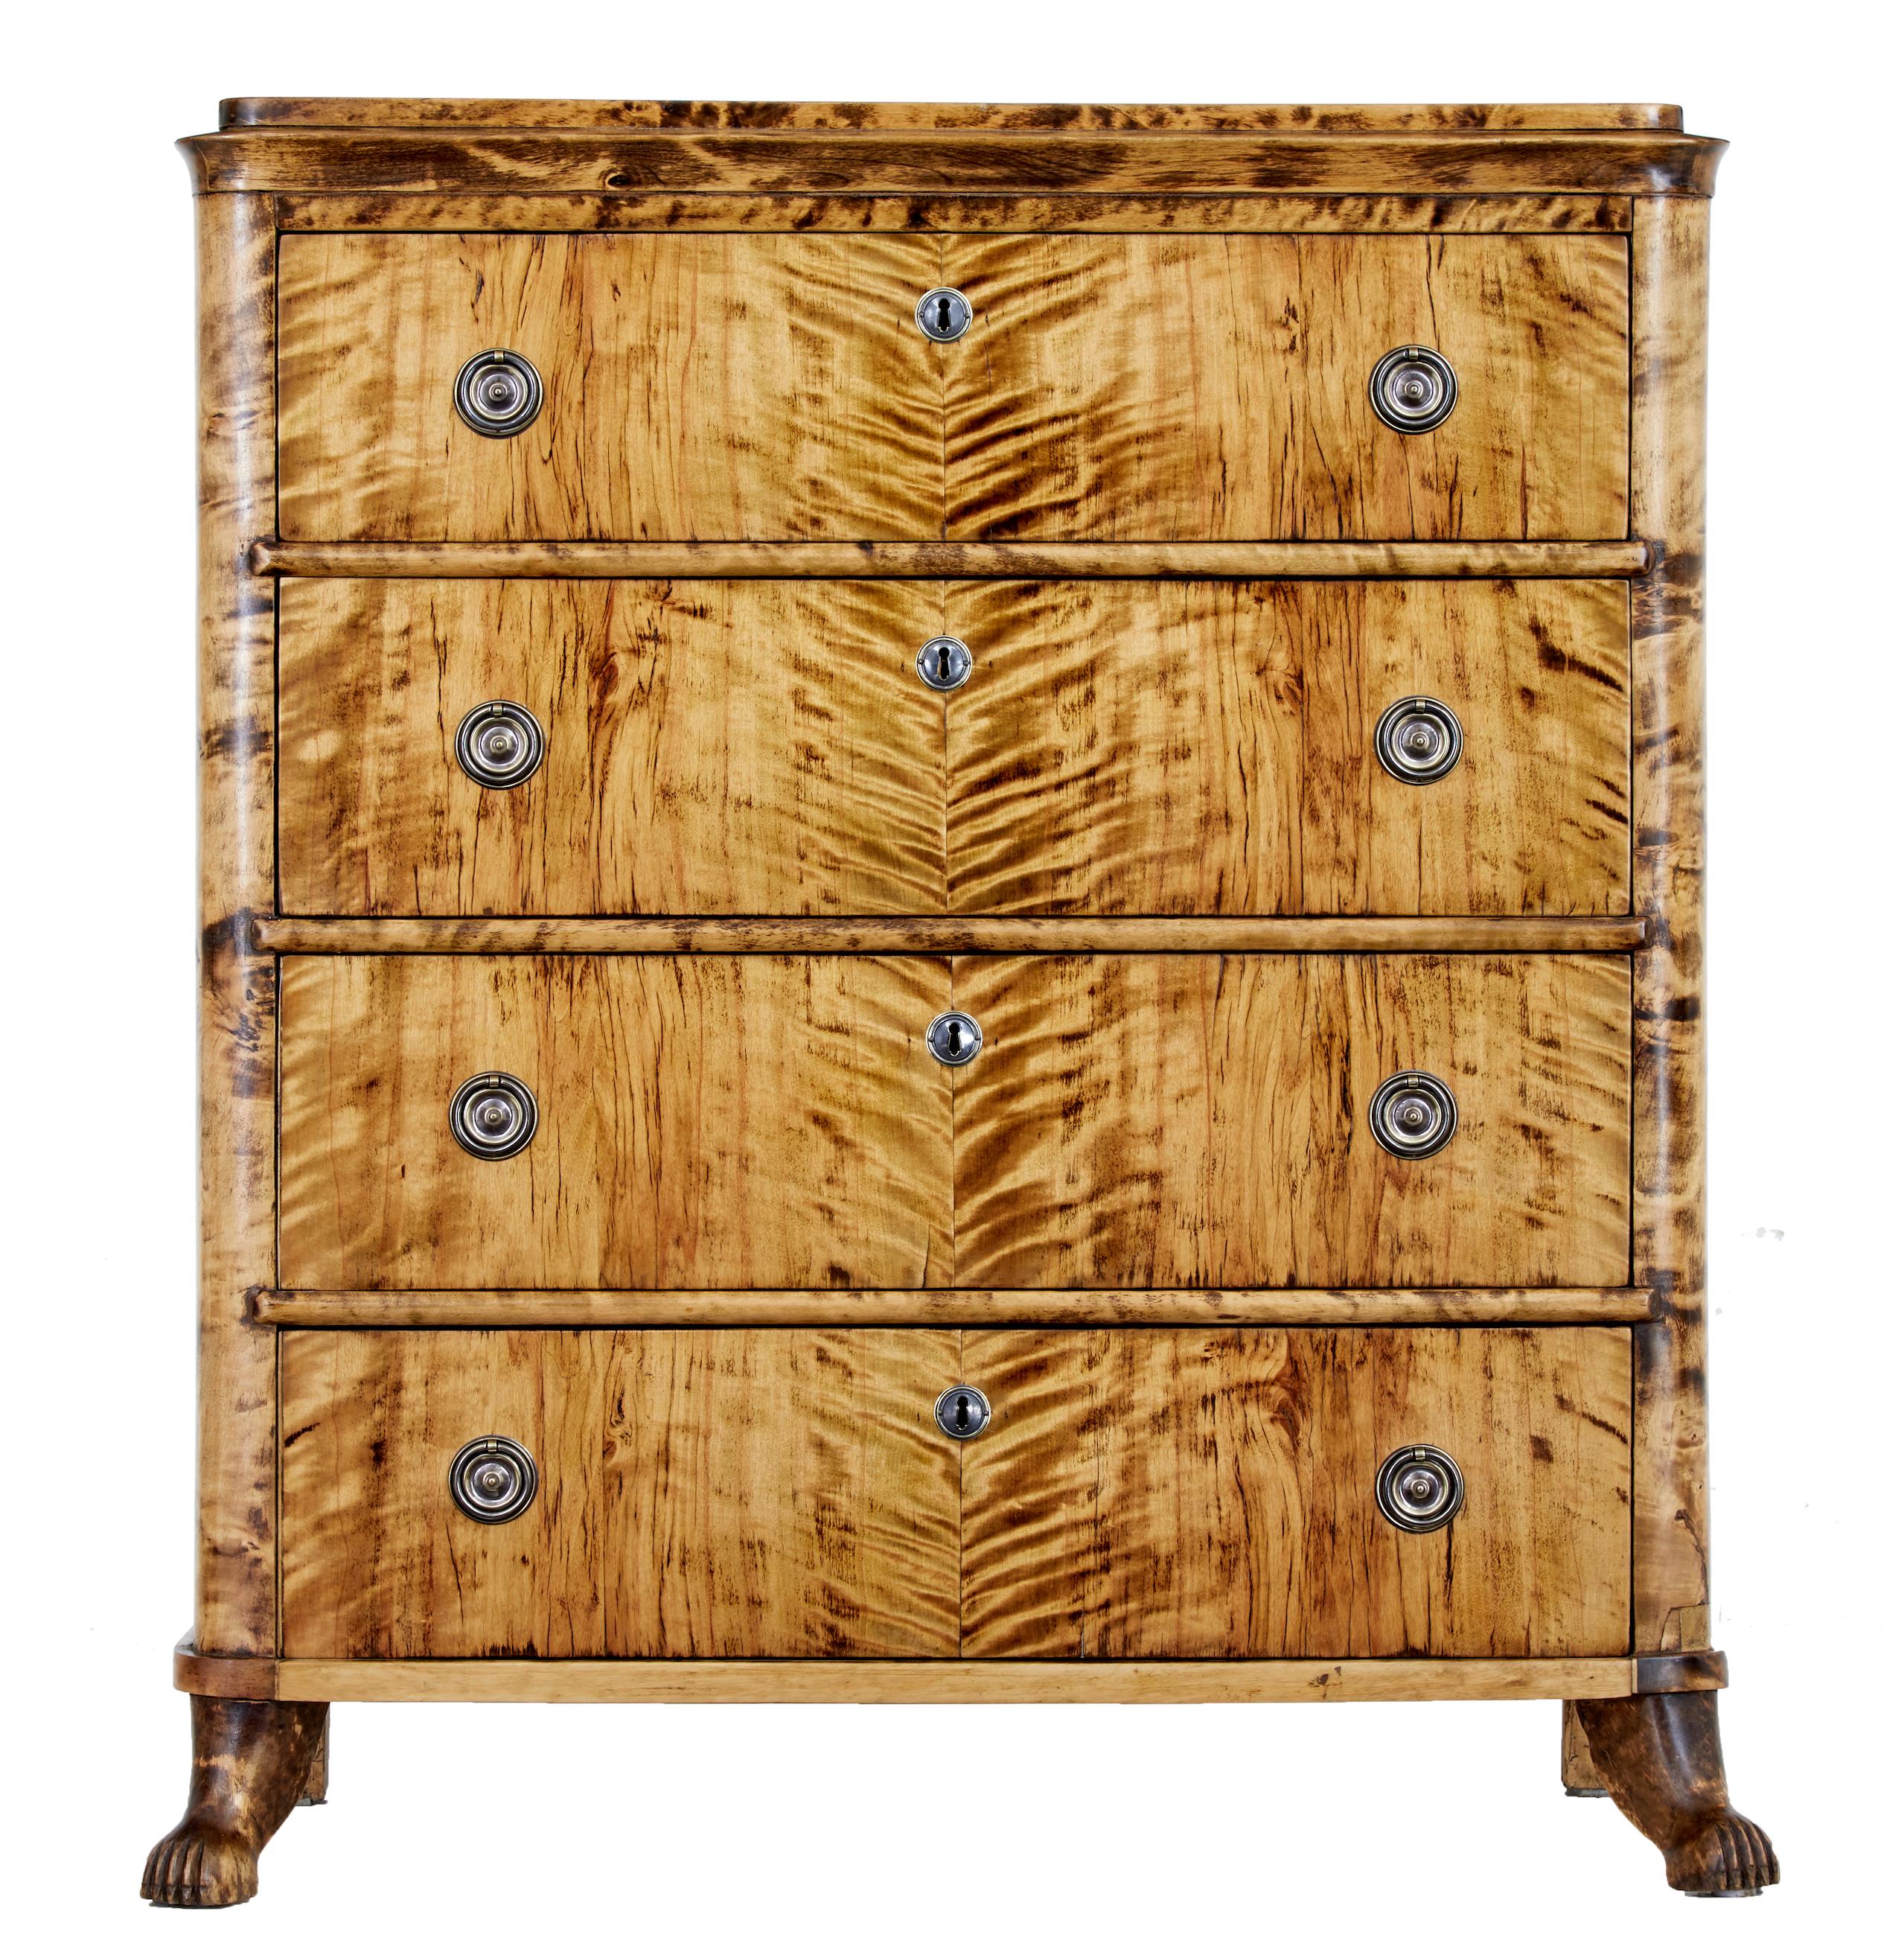 19th century Karl Johan period birch chest of drawers circa 1840.

Striking 4 drawer Swedish chest of drawers from the king Karl Johan period. Shaped top surface, below which are 4 equal depth drawers beautifully veneered in match book